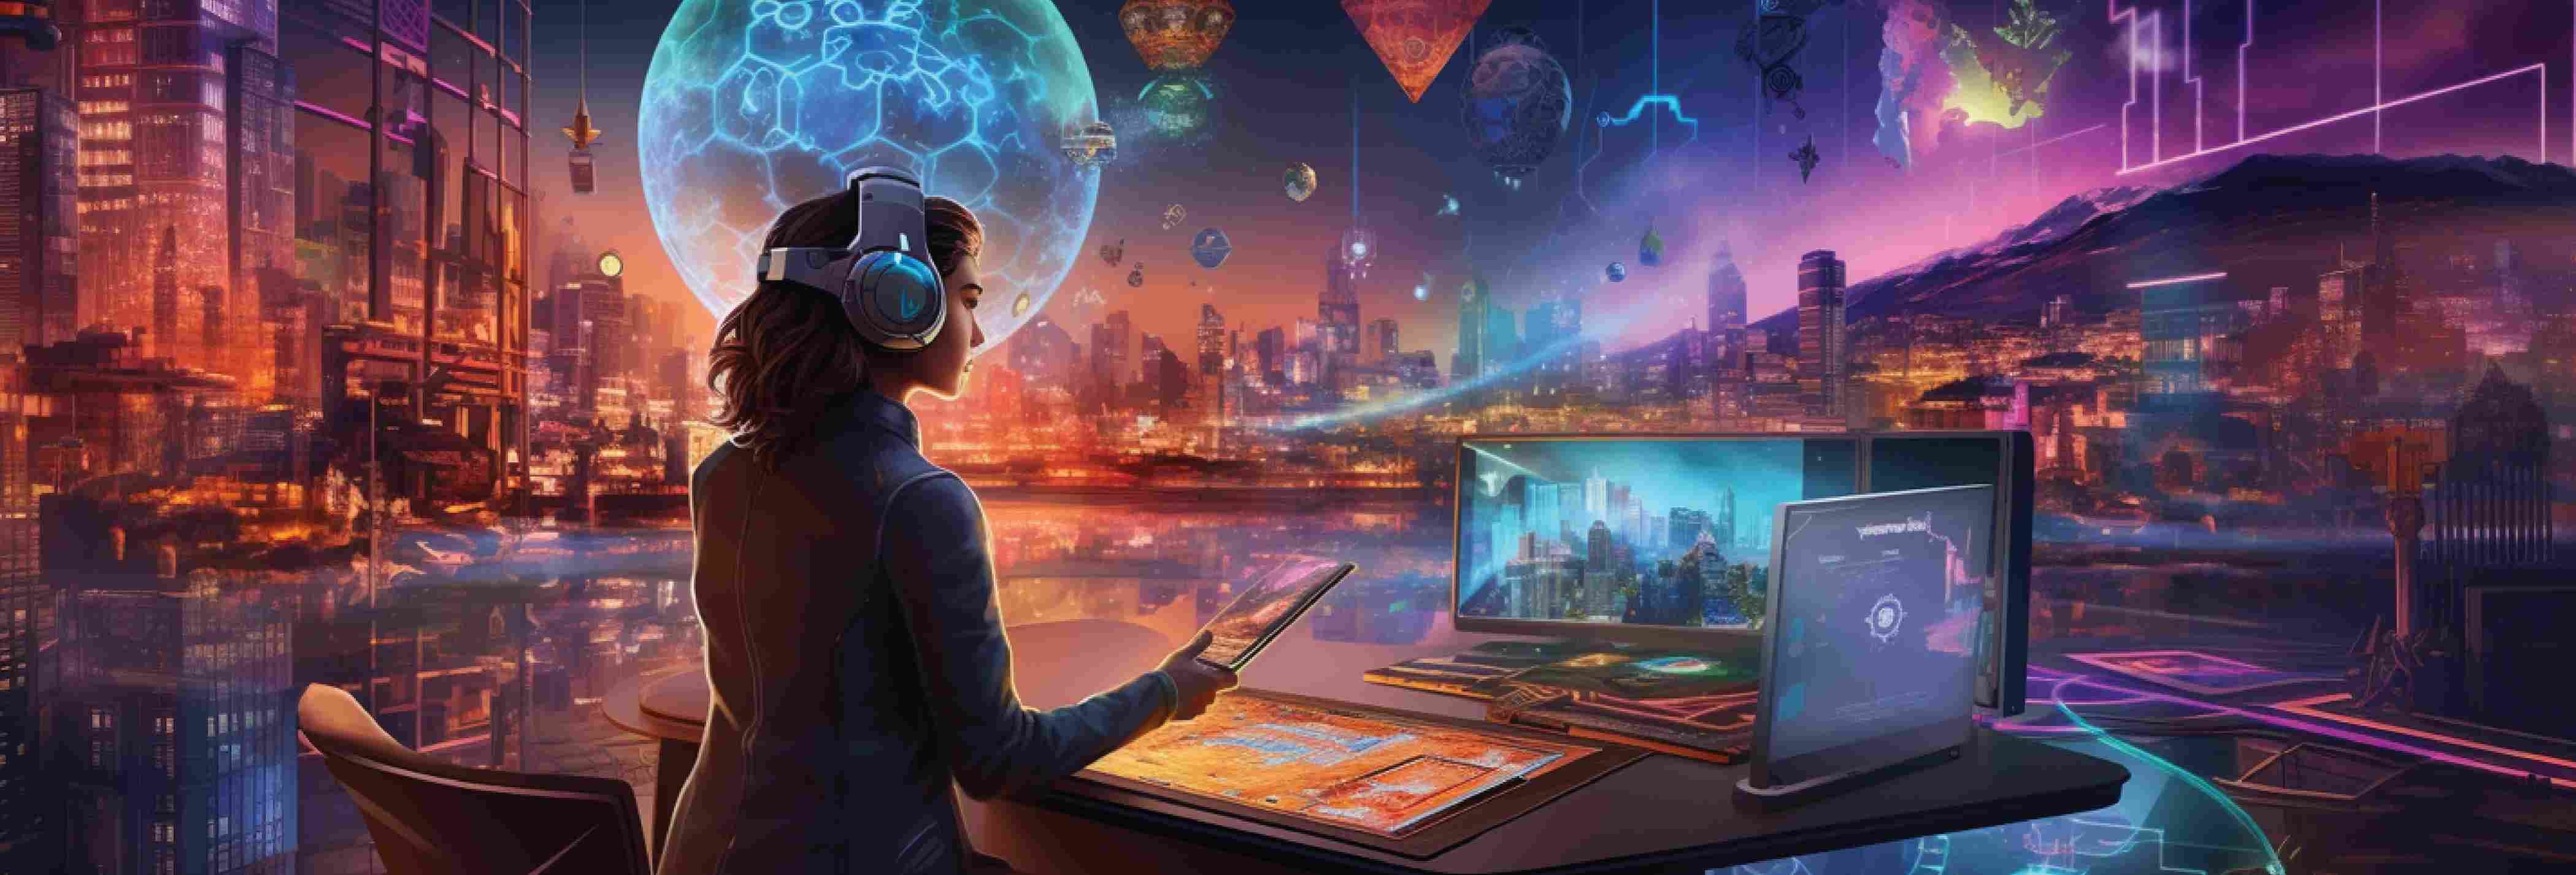 A New Frontier Of Investors: Metaverse Games